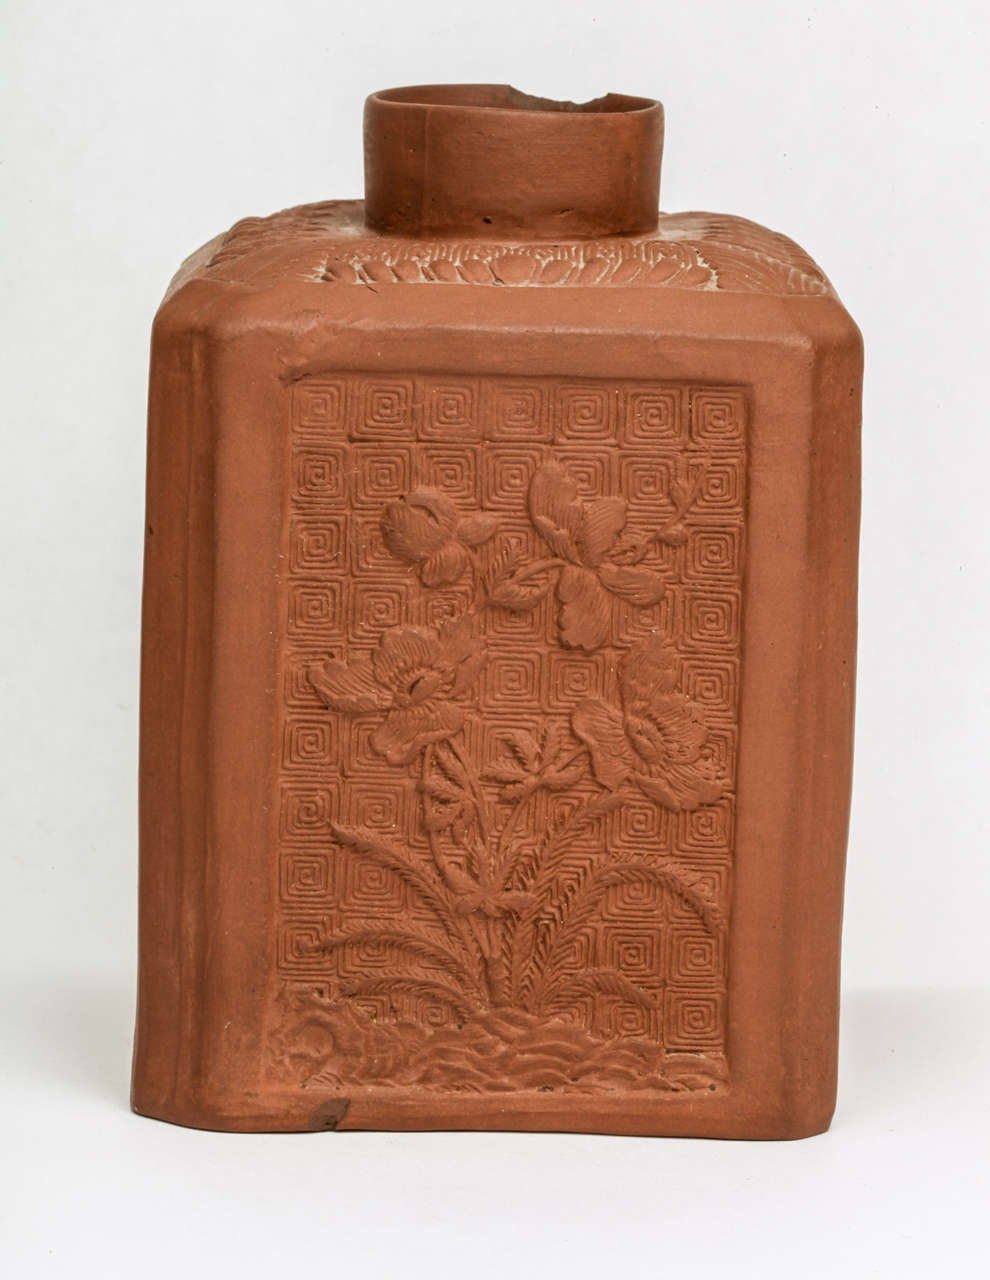 A rare English redware pottery rectangular tea caddy, each panel with a scrolled background and Oriental flowers